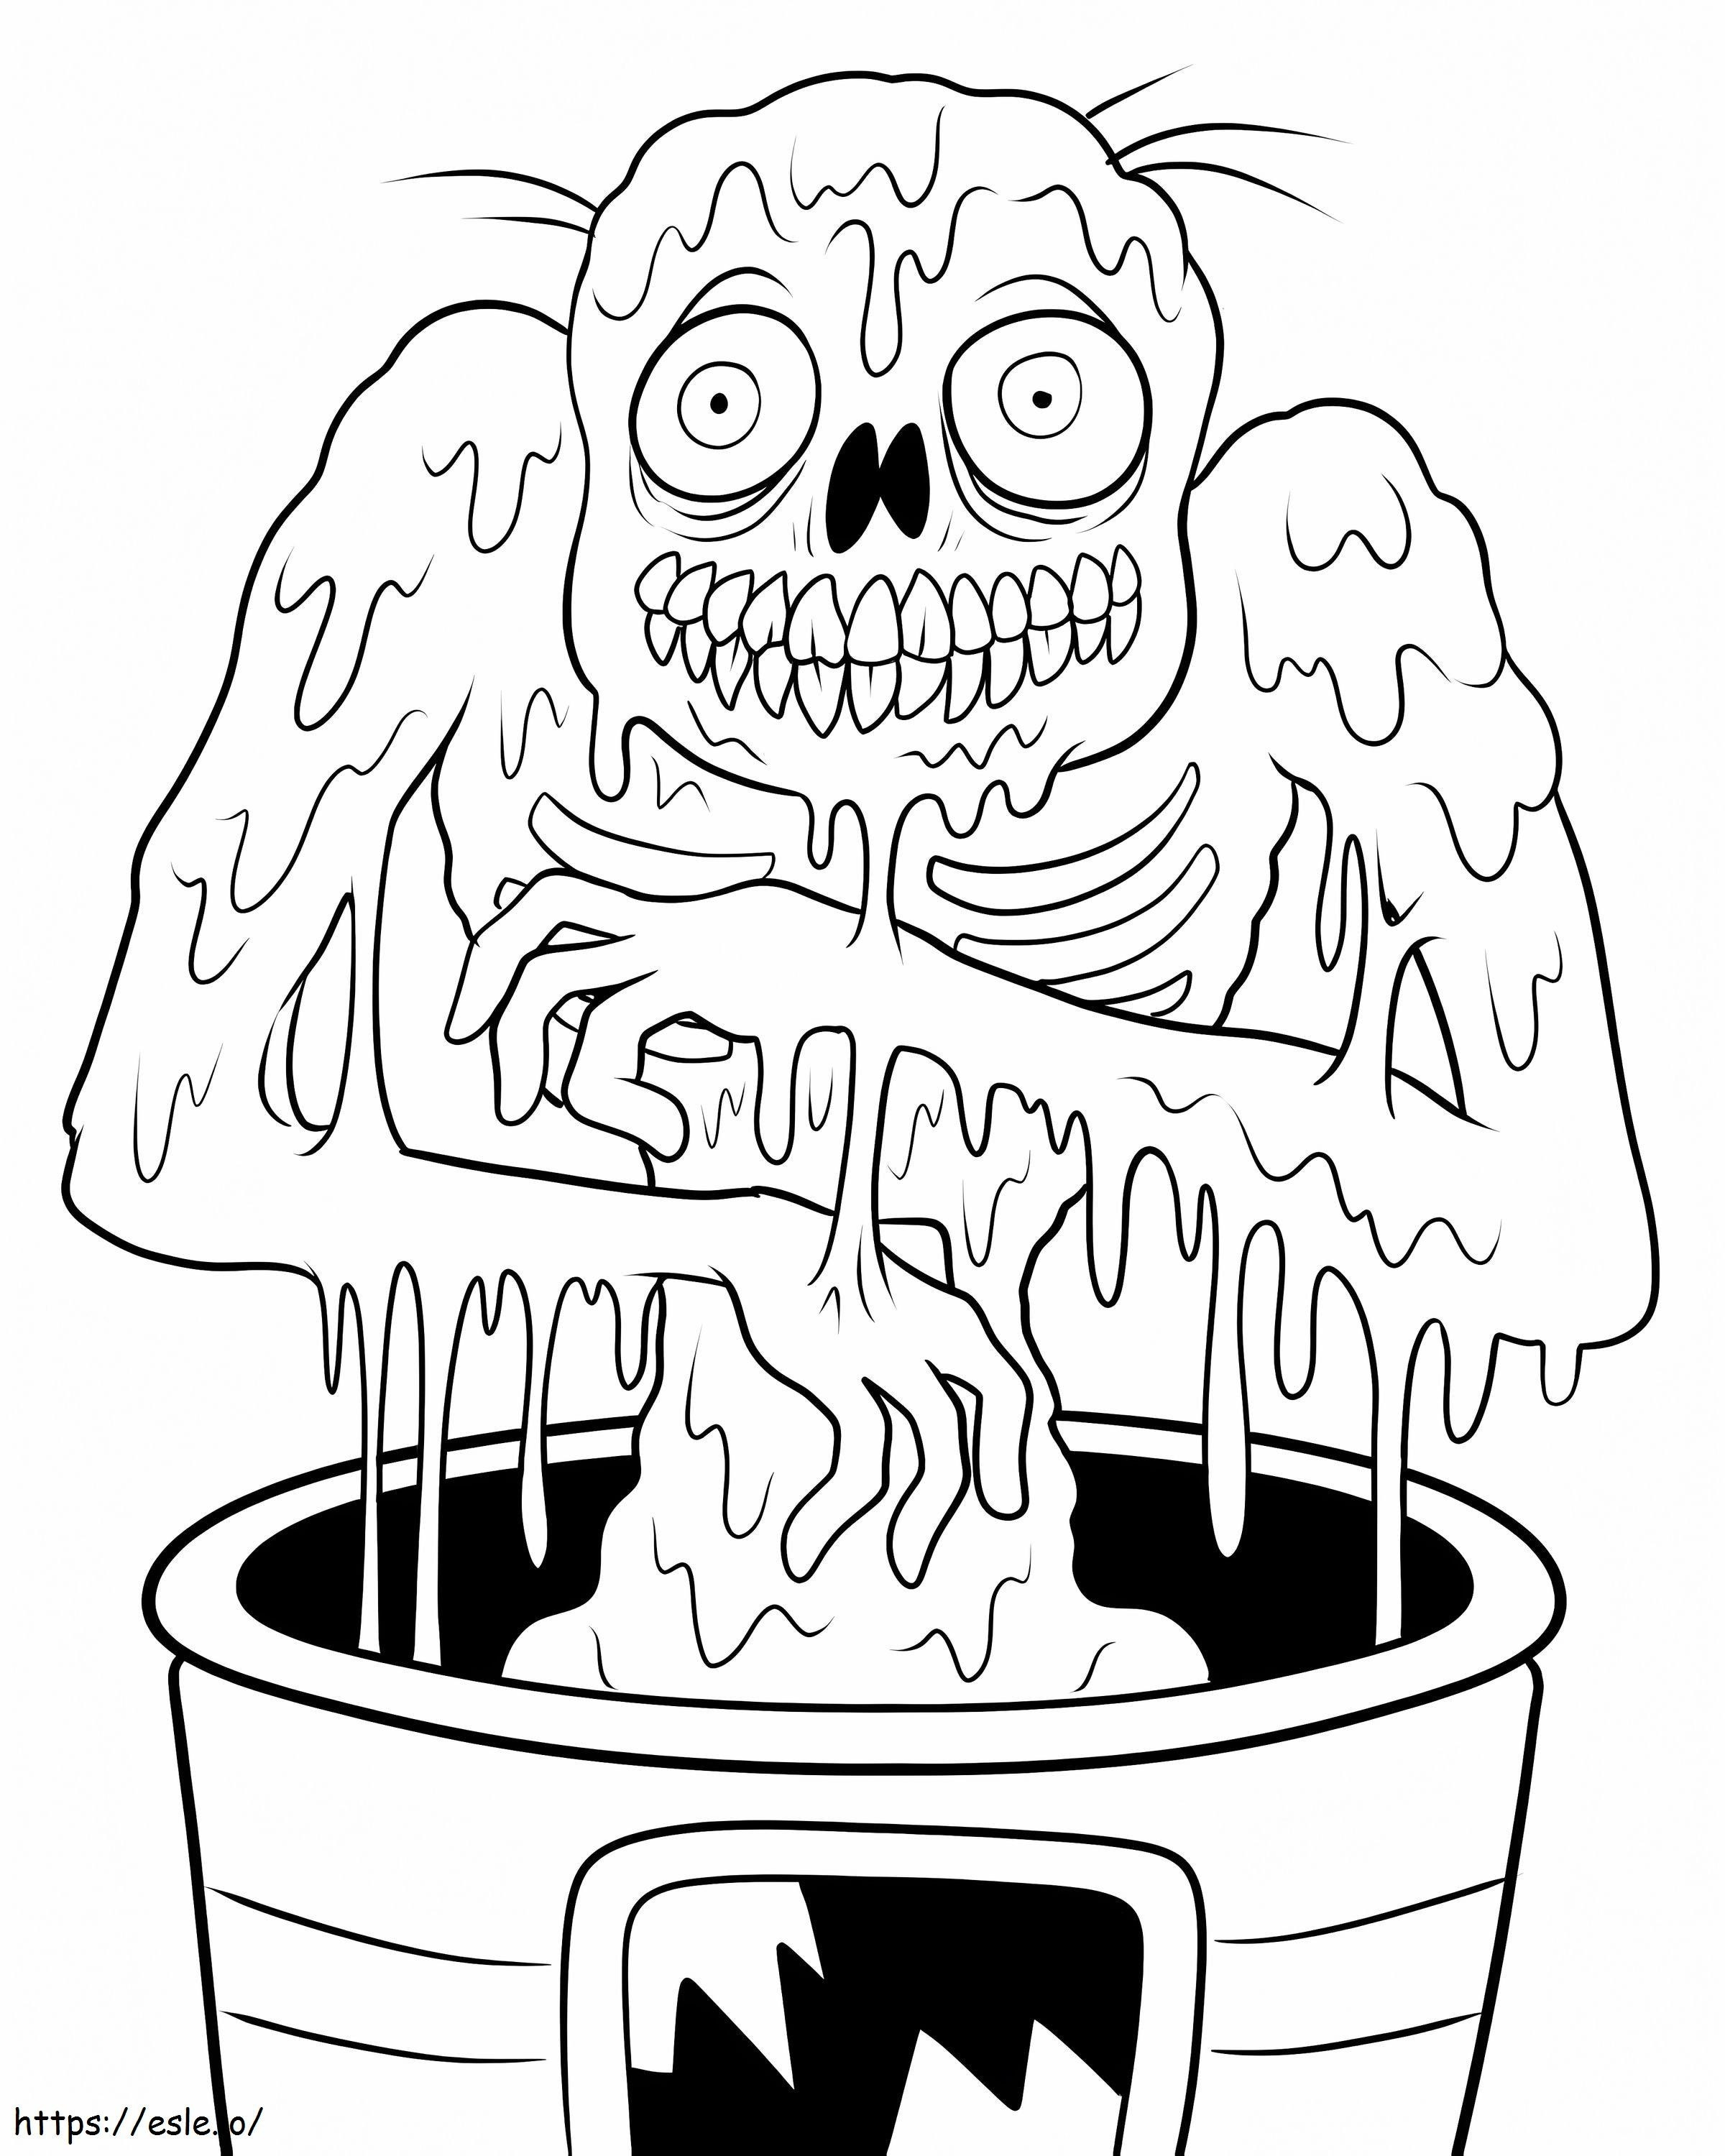 Nice Zombie coloring page